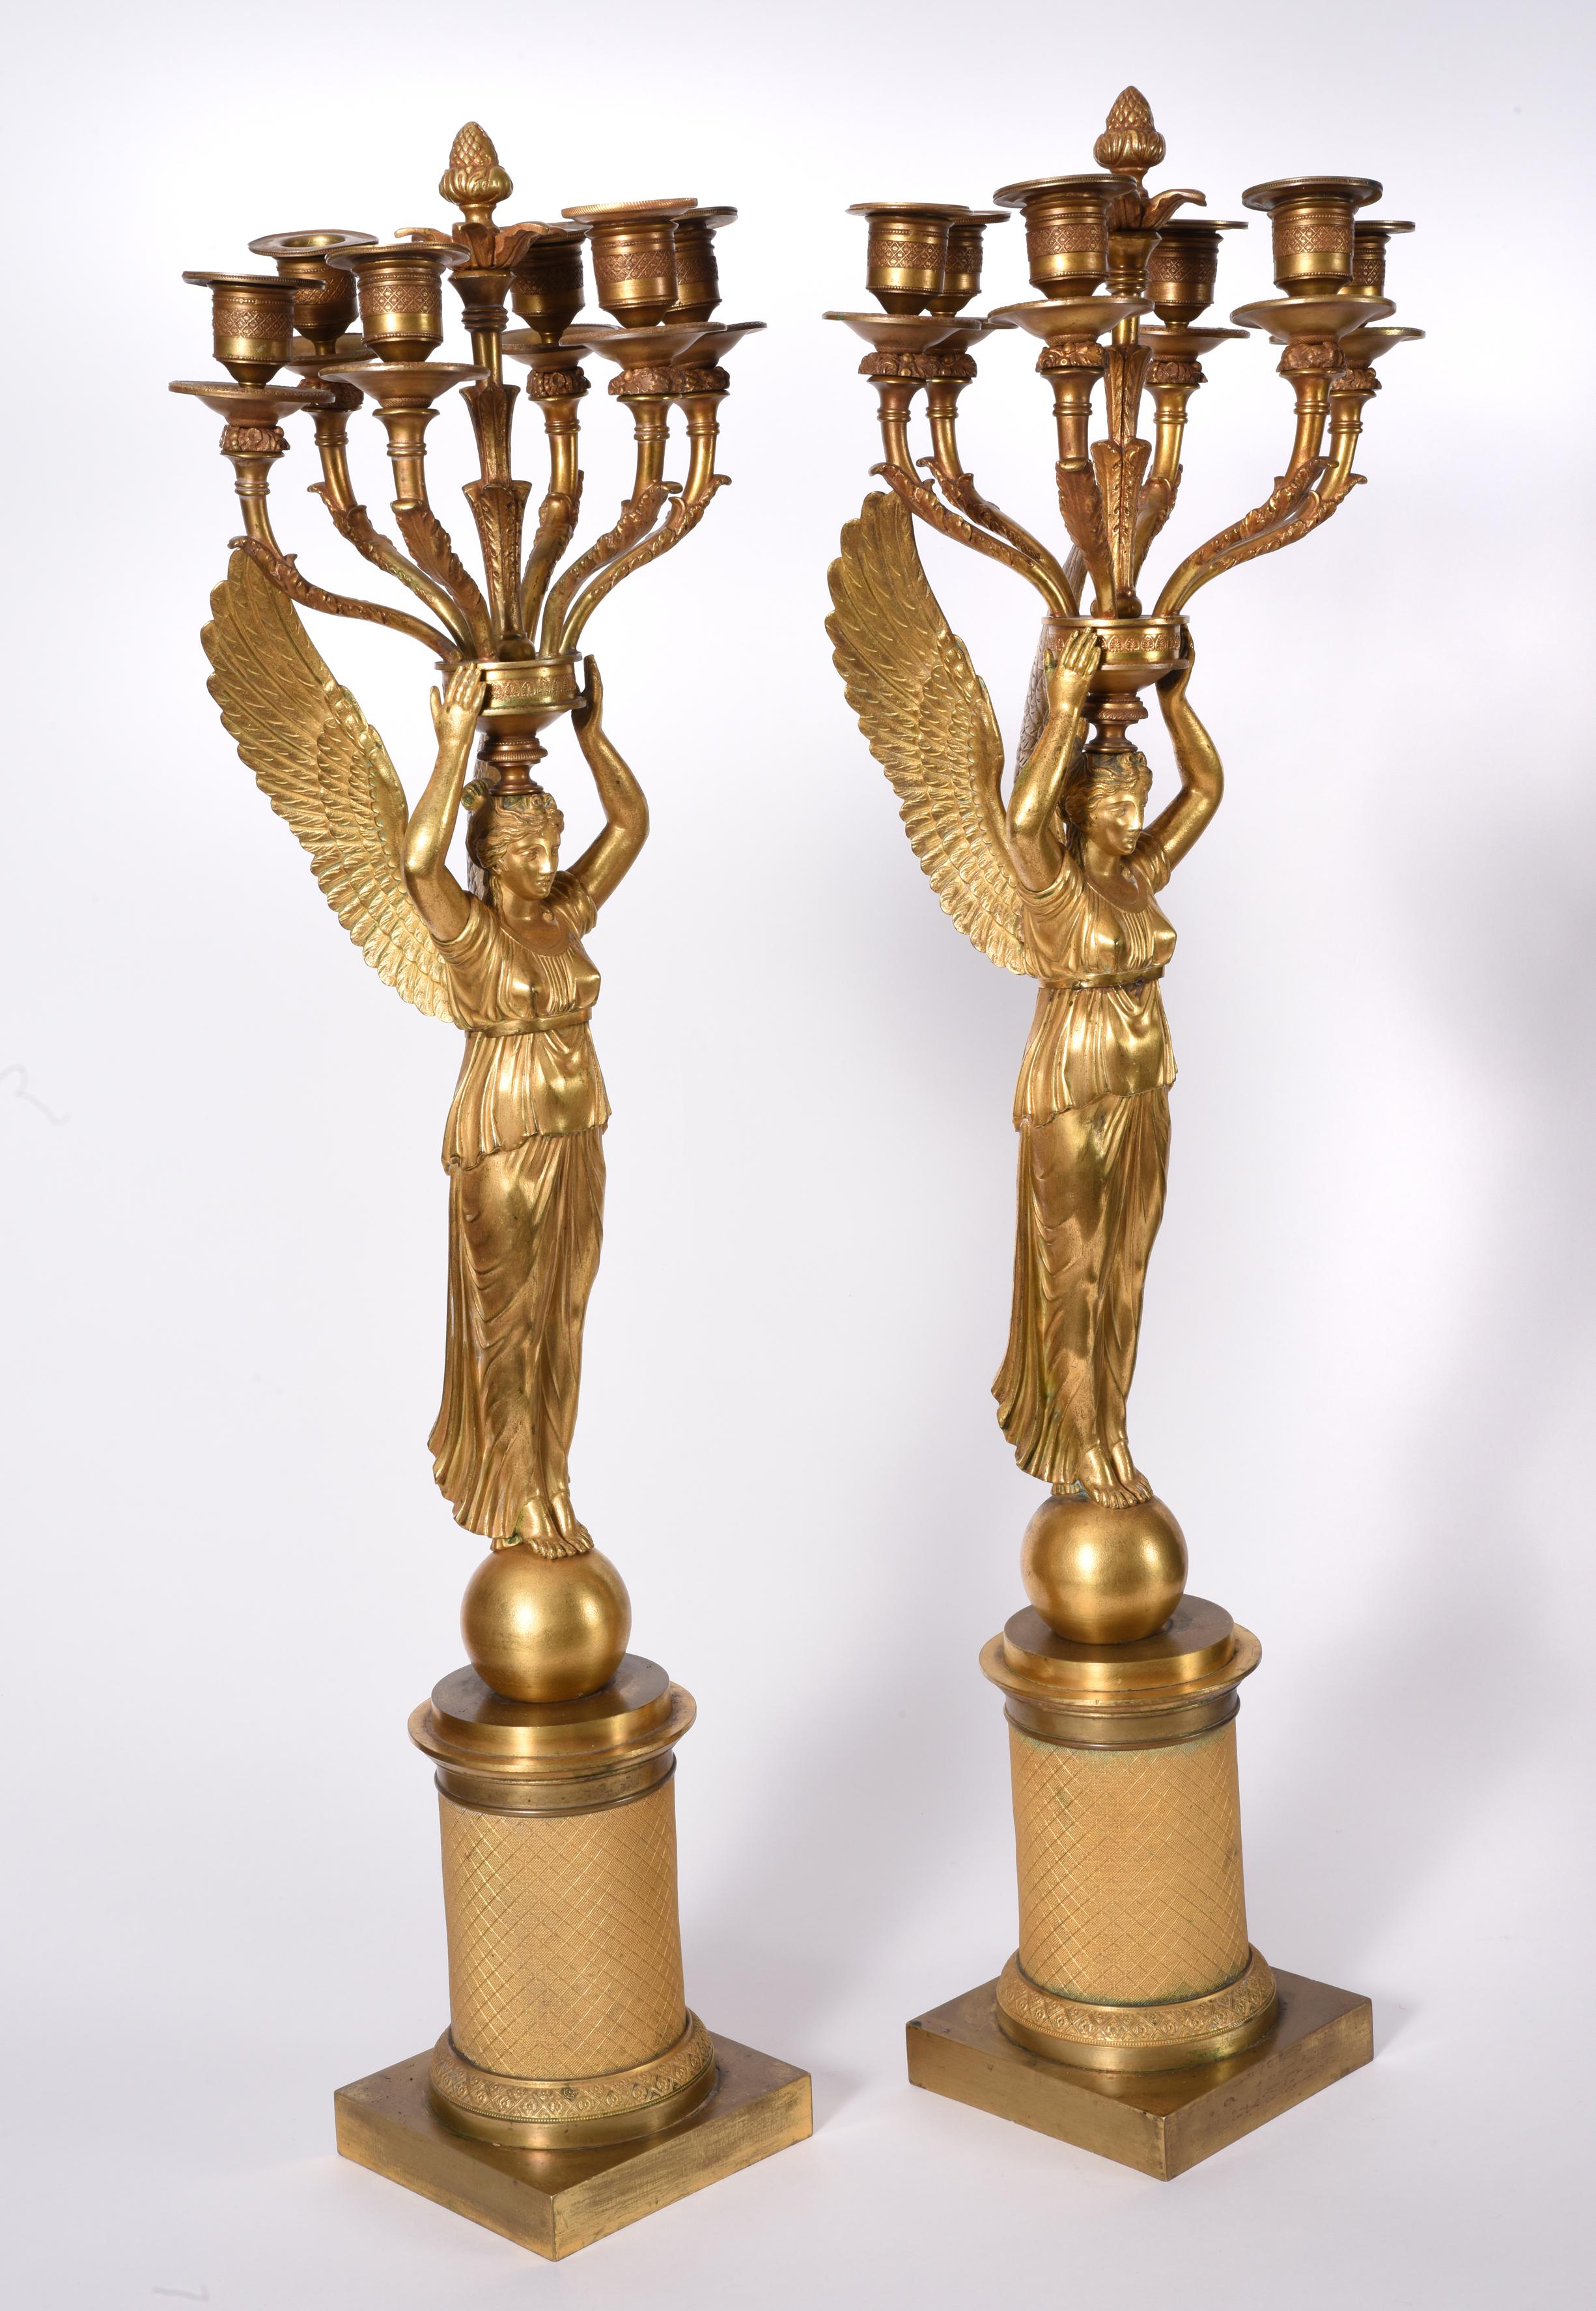 Mid-19th century pair of Empire style gilt bronze six-light candelabras. Each candelabras is in excellent antique condition with minor consistent to age and use. Each candelabras measure about 28 inches high x 8 inches diameter.
 